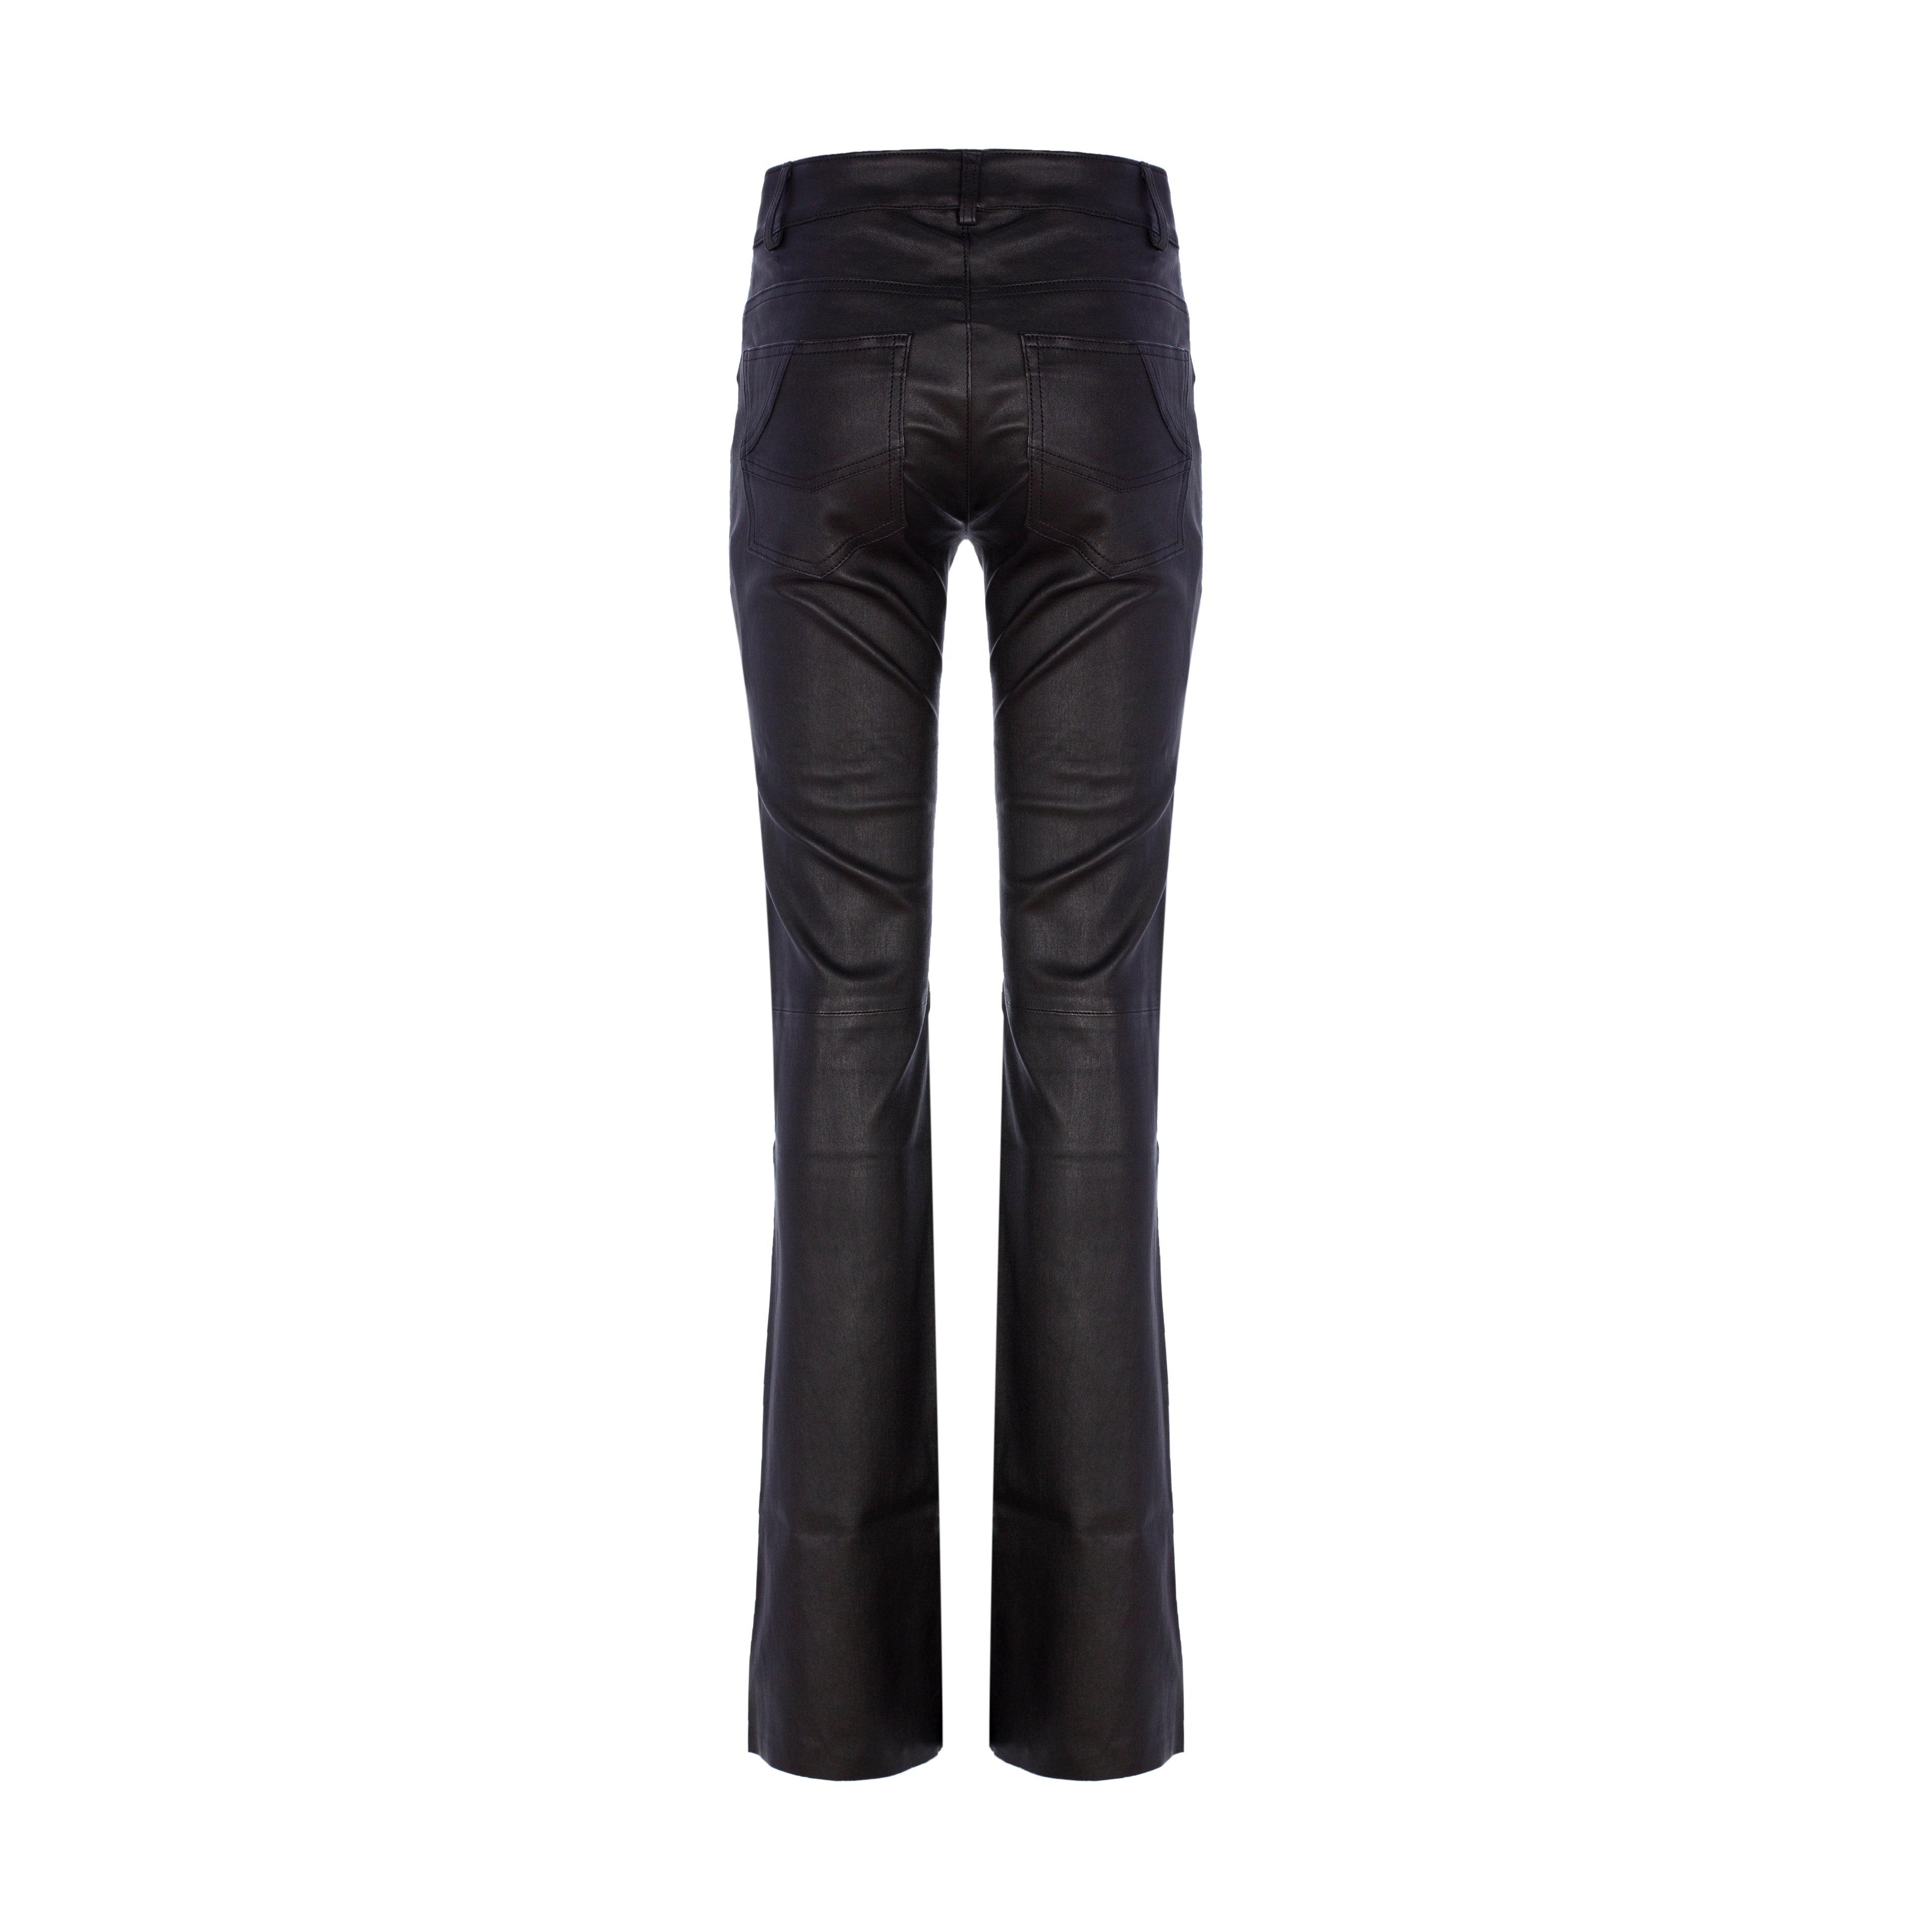 Black Flare Leather Pant, The Perfect Fit